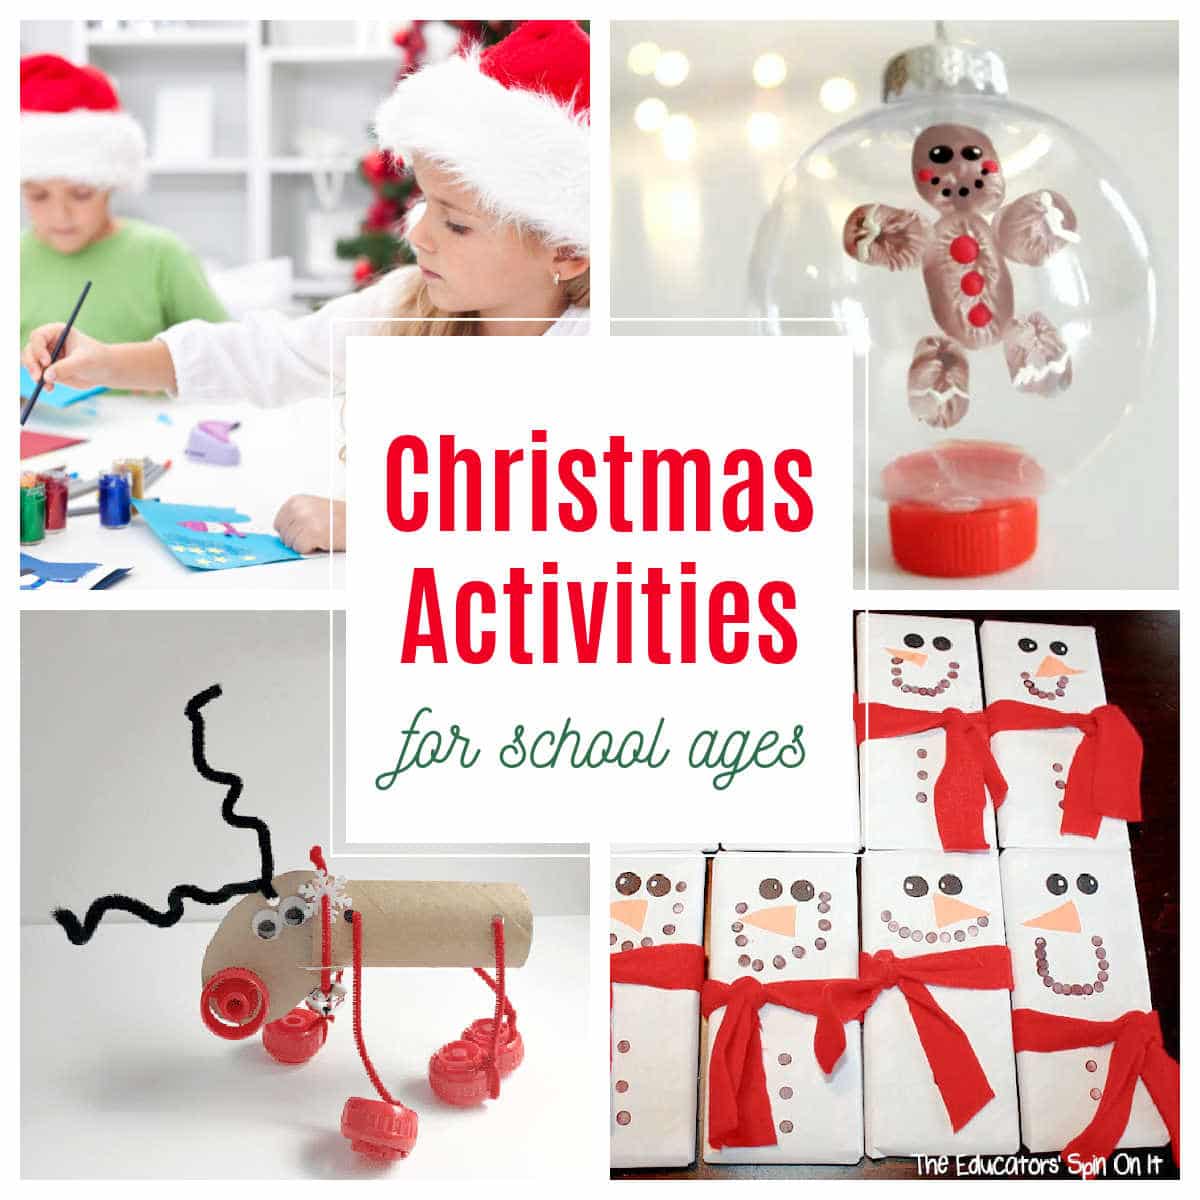 adorable christmas activities for school kids to create for the holidays for loved ones including gingerbread fingerprint ornament, snowman candy wrappers and reindeer STEm Challenge